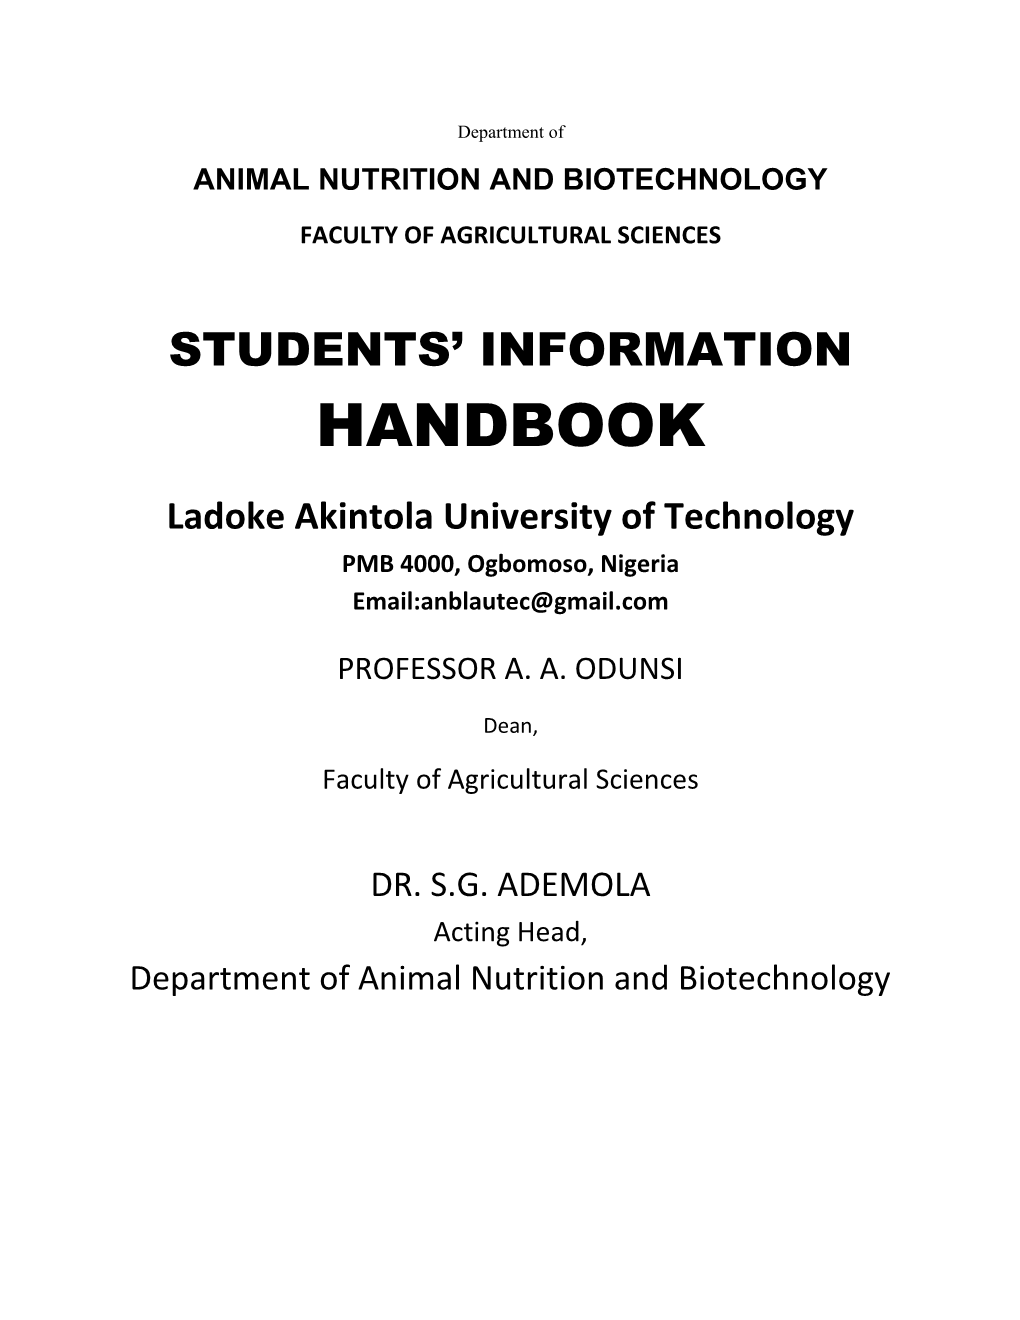 Animal Nutrition and Biotechnology